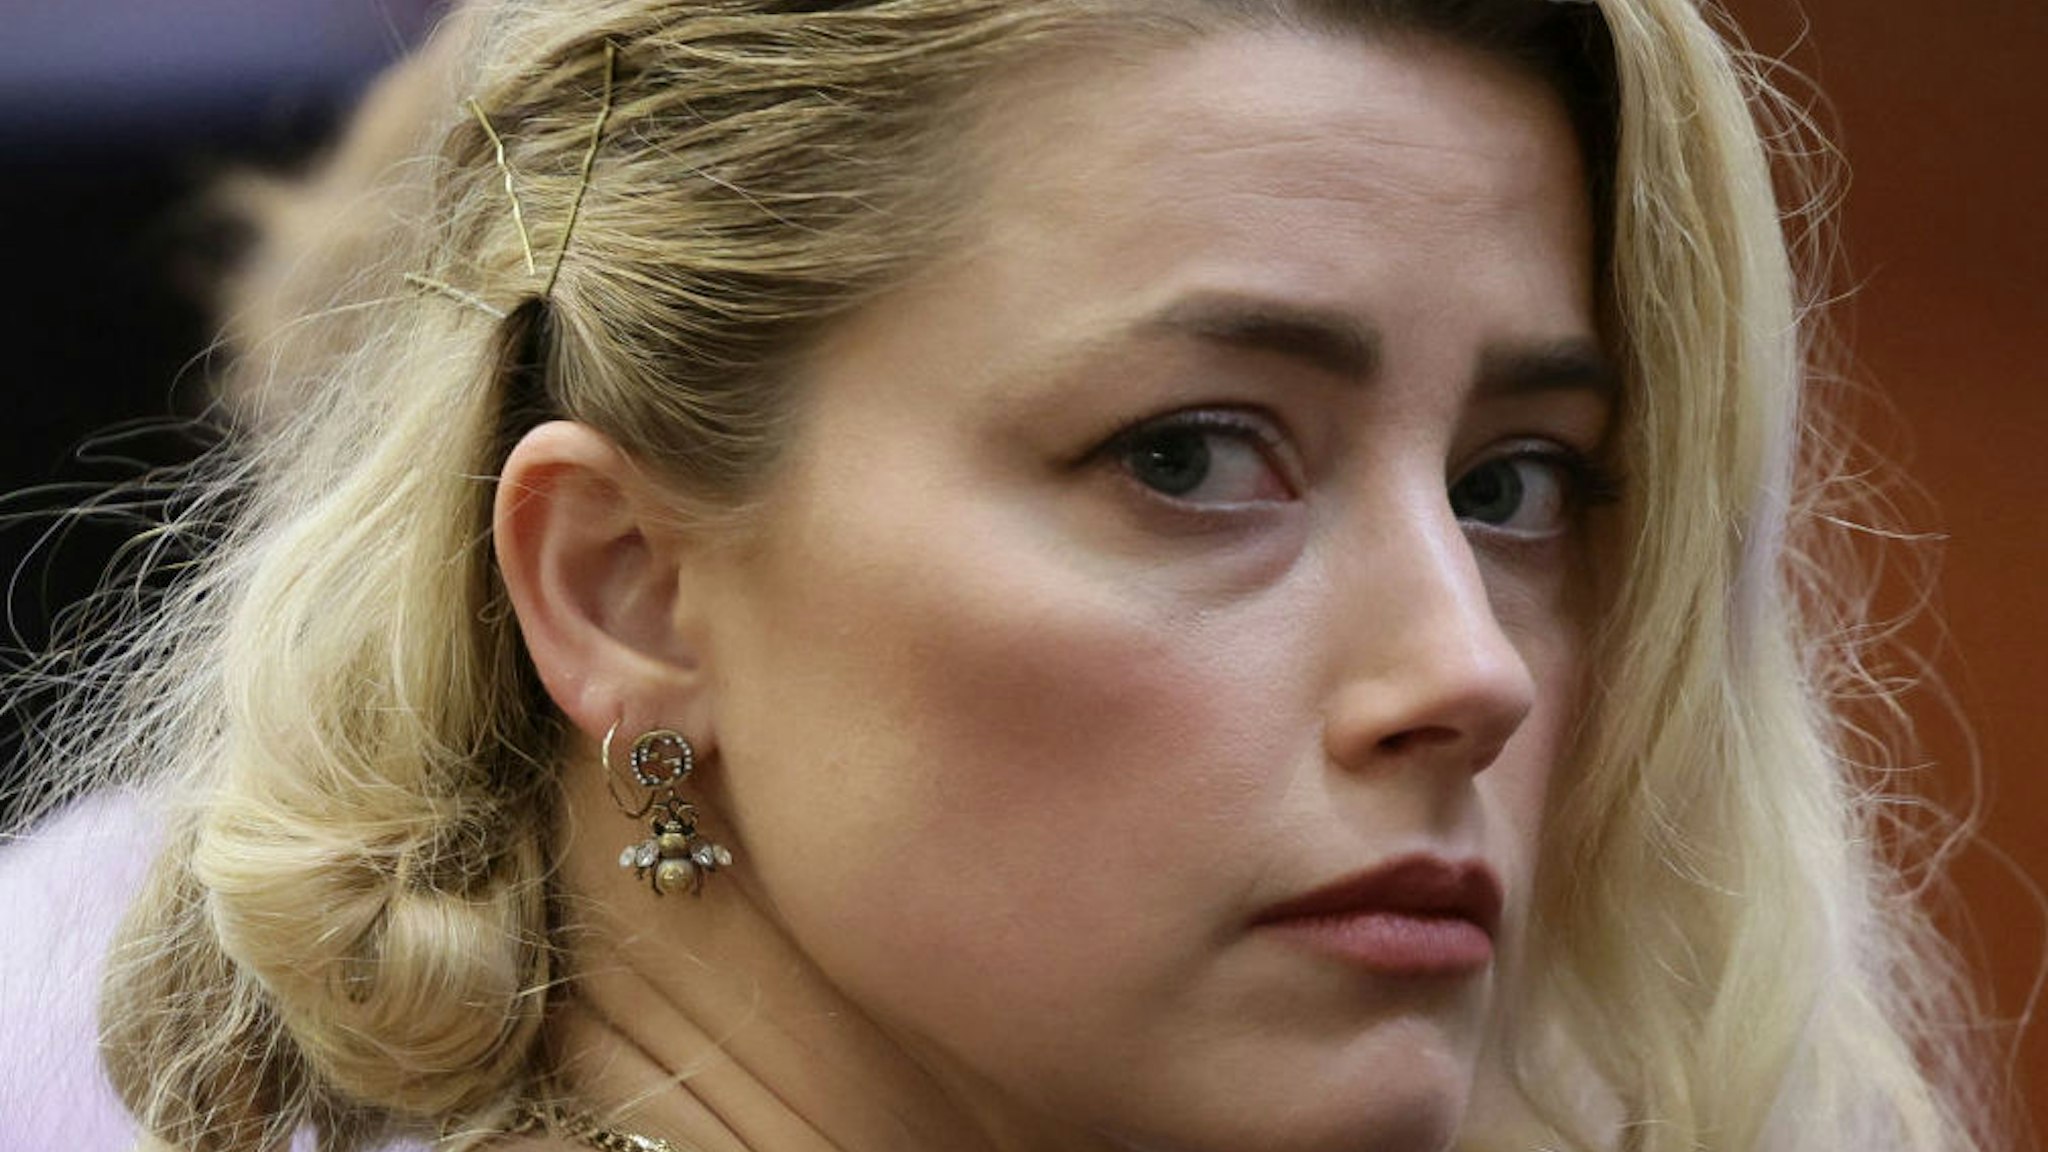 Actor Amber Heard waits before the jury said that they believe she defamed ex-husband Johnny Depp while announcing split verdicts in favor of both her ex-husband Johnny Depp and Heard on their claim and counter-claim in the Depp v. Heard civil defamation trial at the Fairfax County Circuit Courthouse in Fairfax, Virginia, on June 1, 2022.